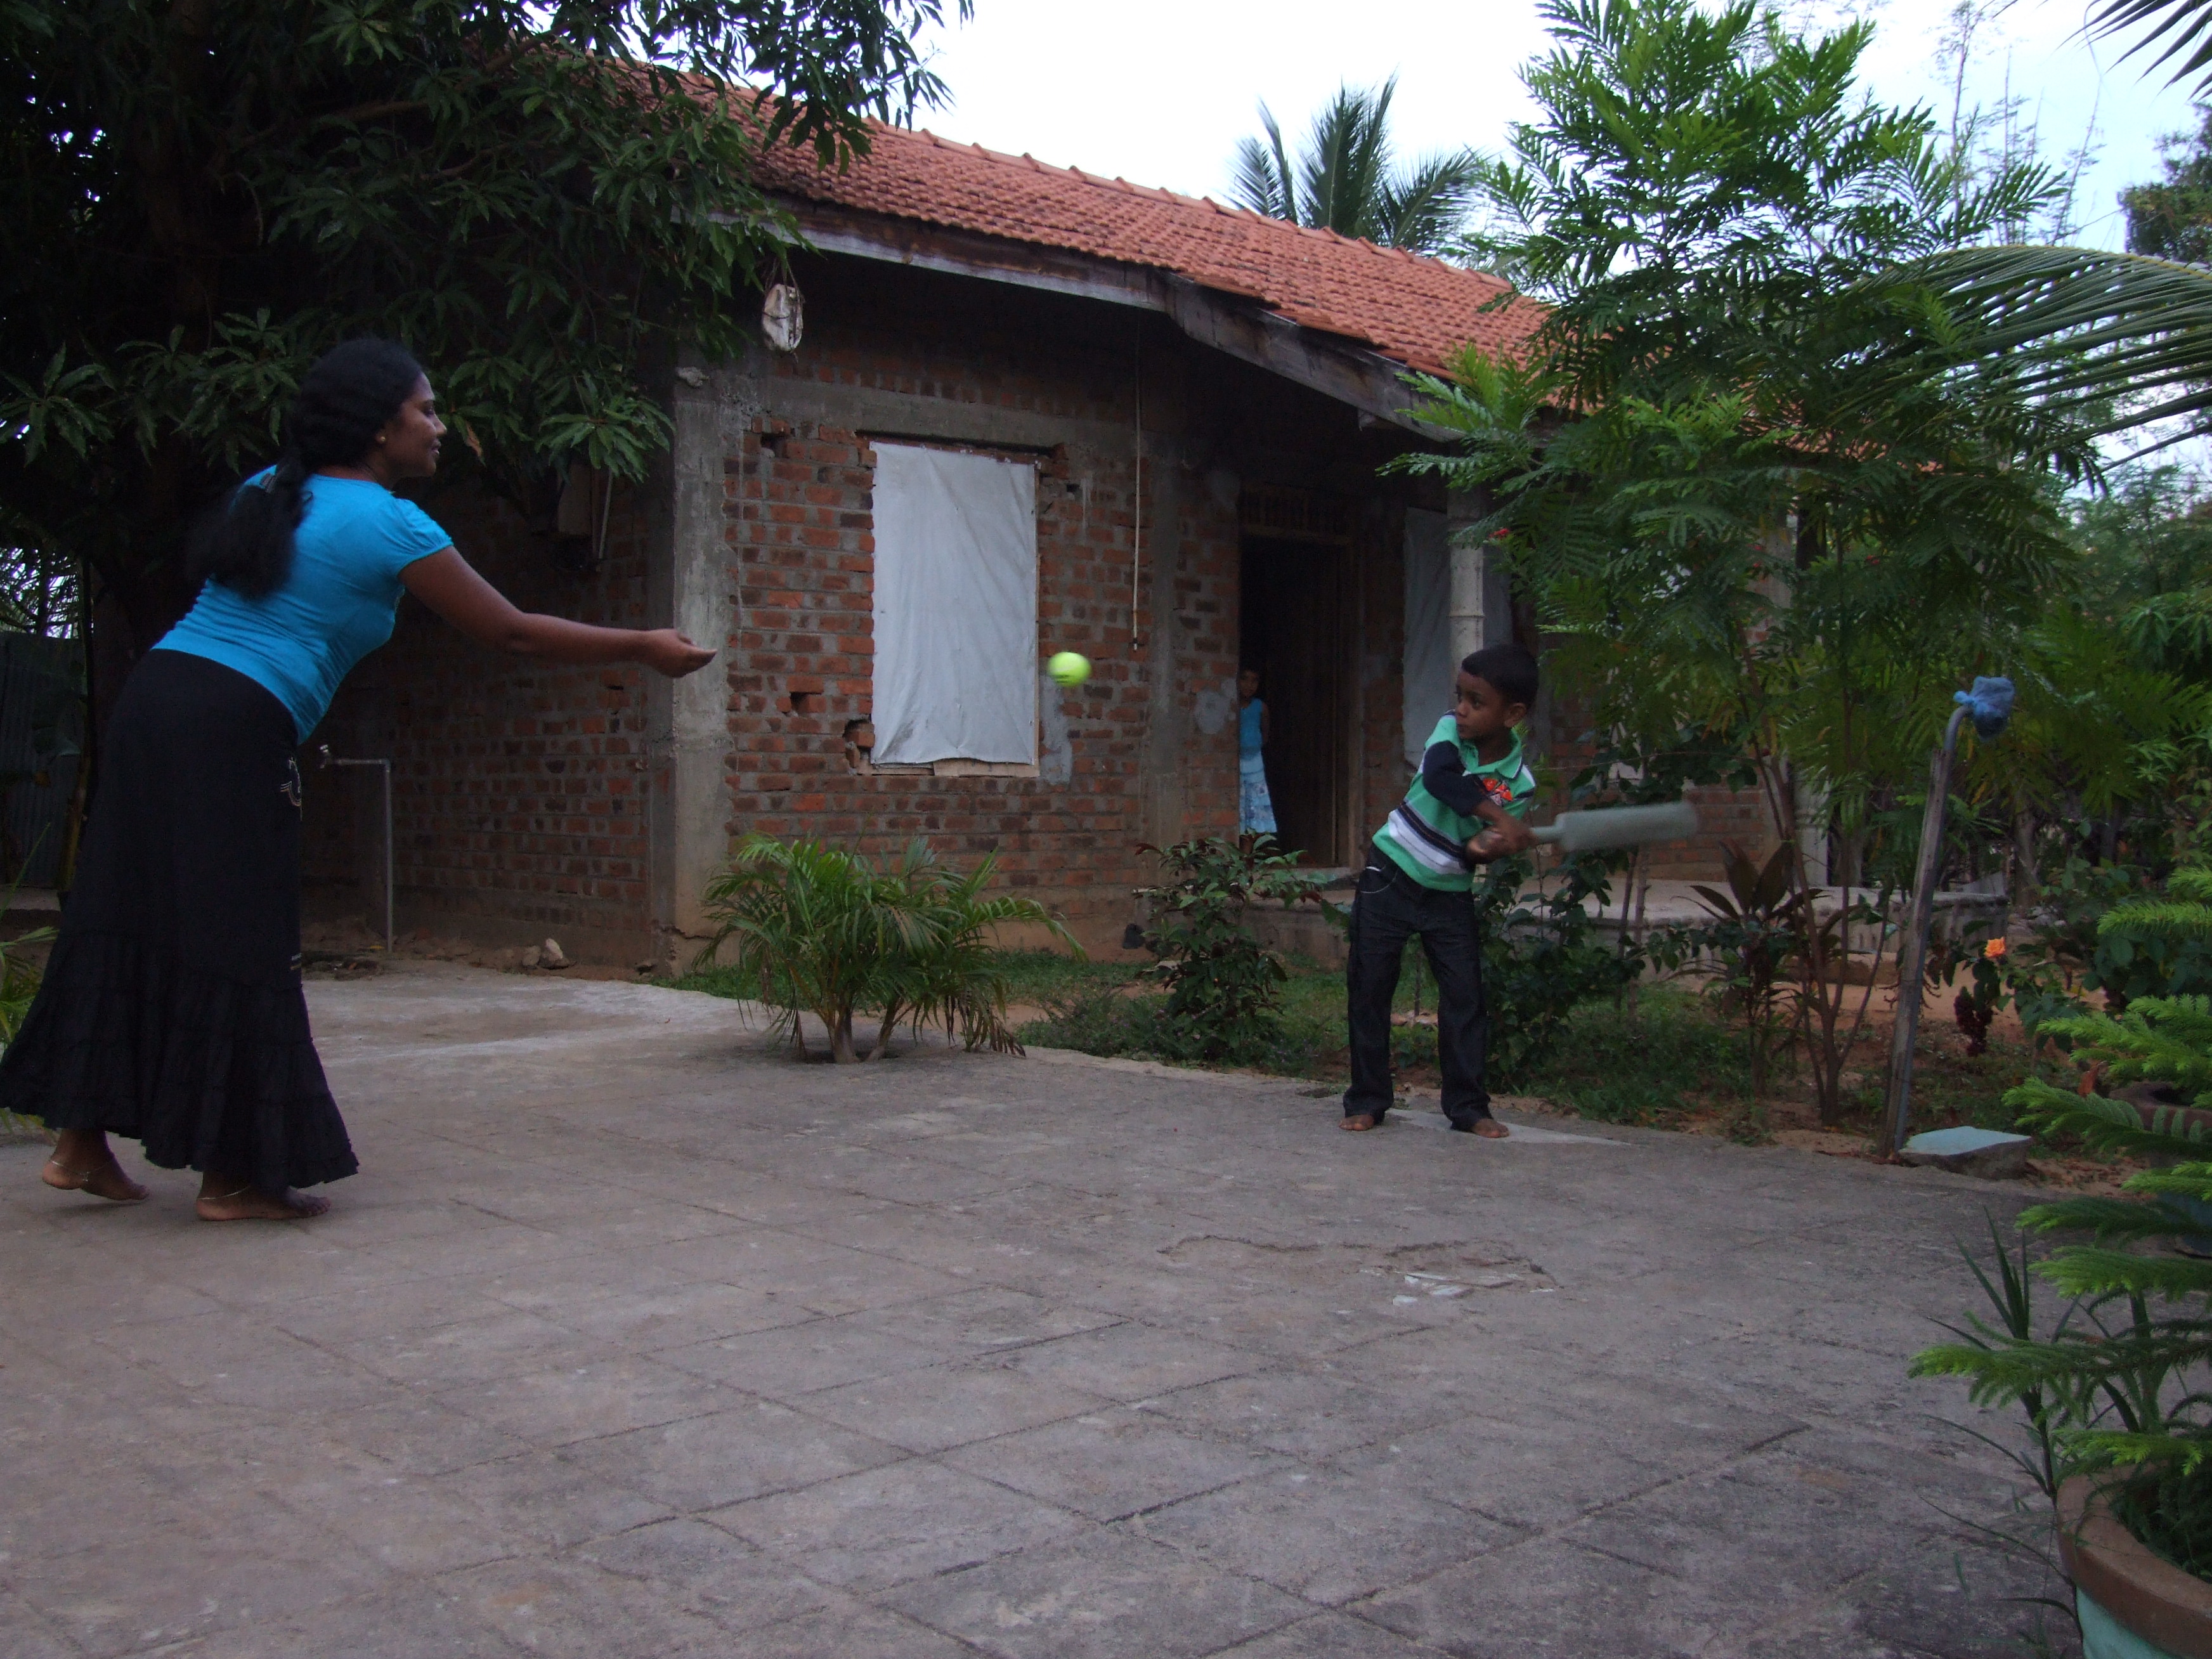 Playing cricket in courtyard